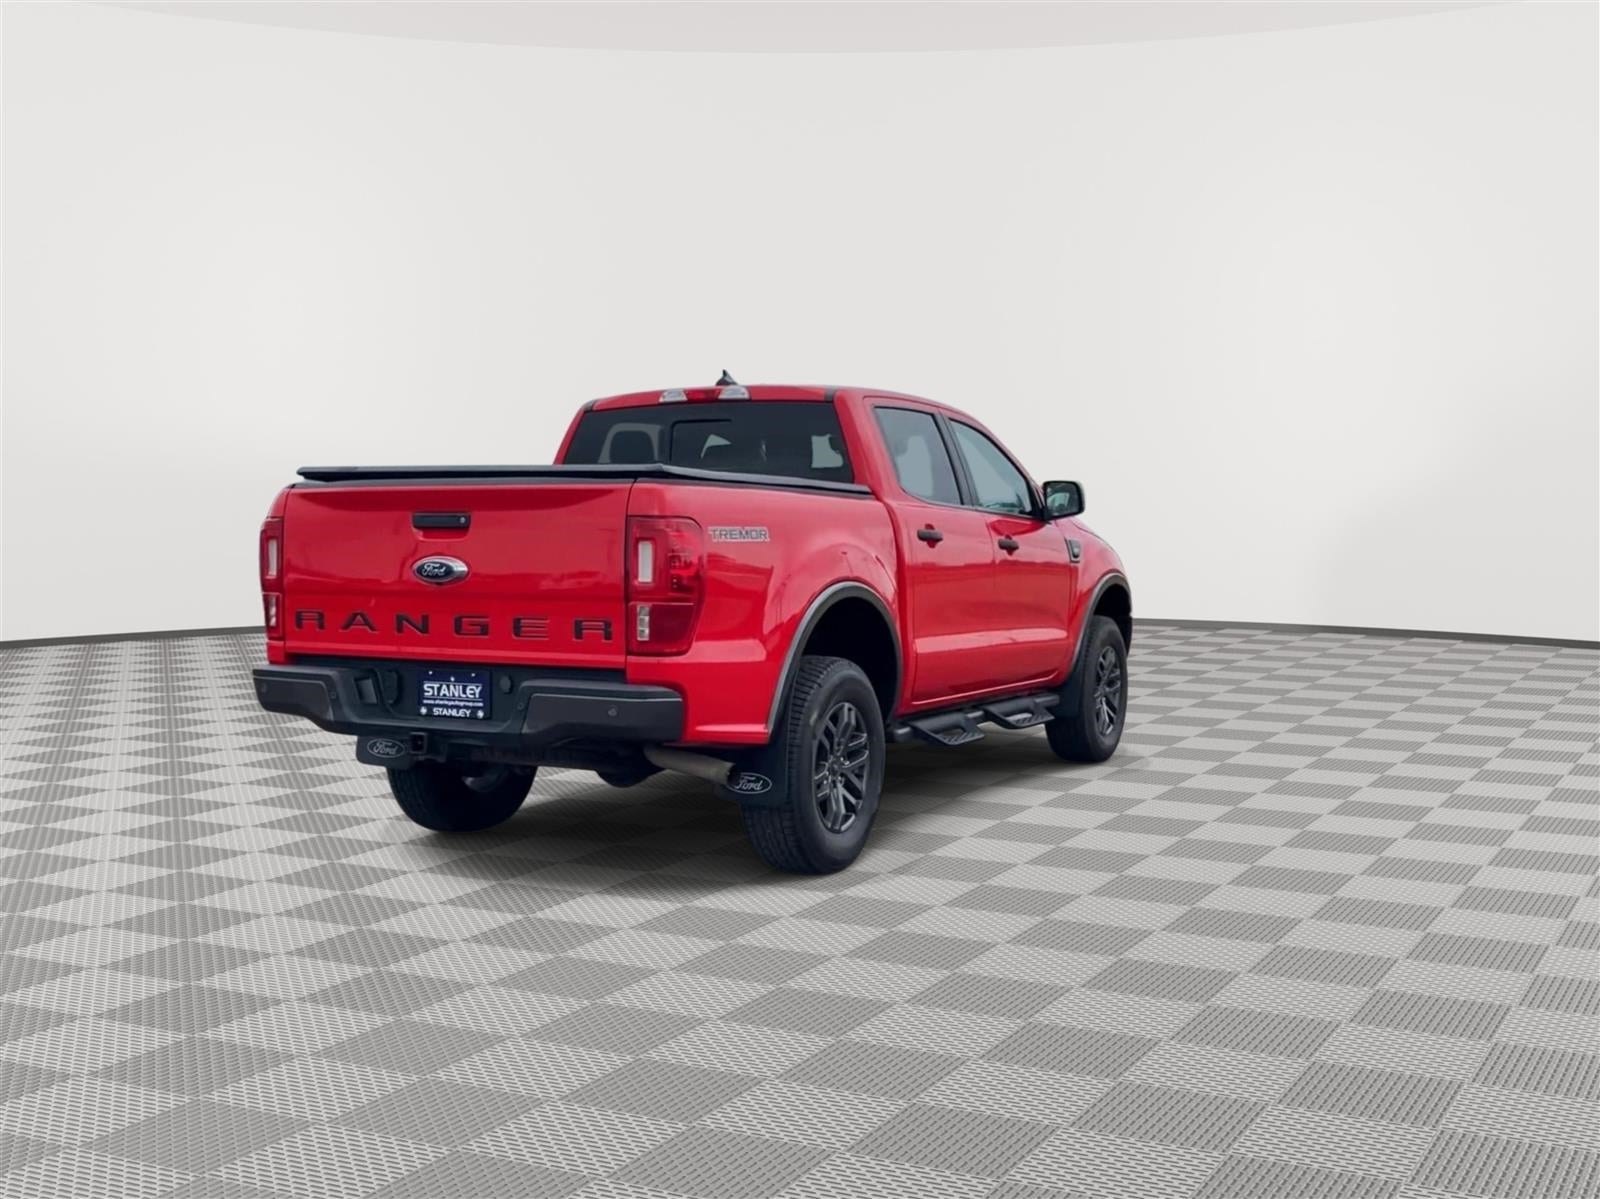 2021 Ford Ranger XLT, TREMOR OFF-ROAD, 4WD, TRAILER TOW